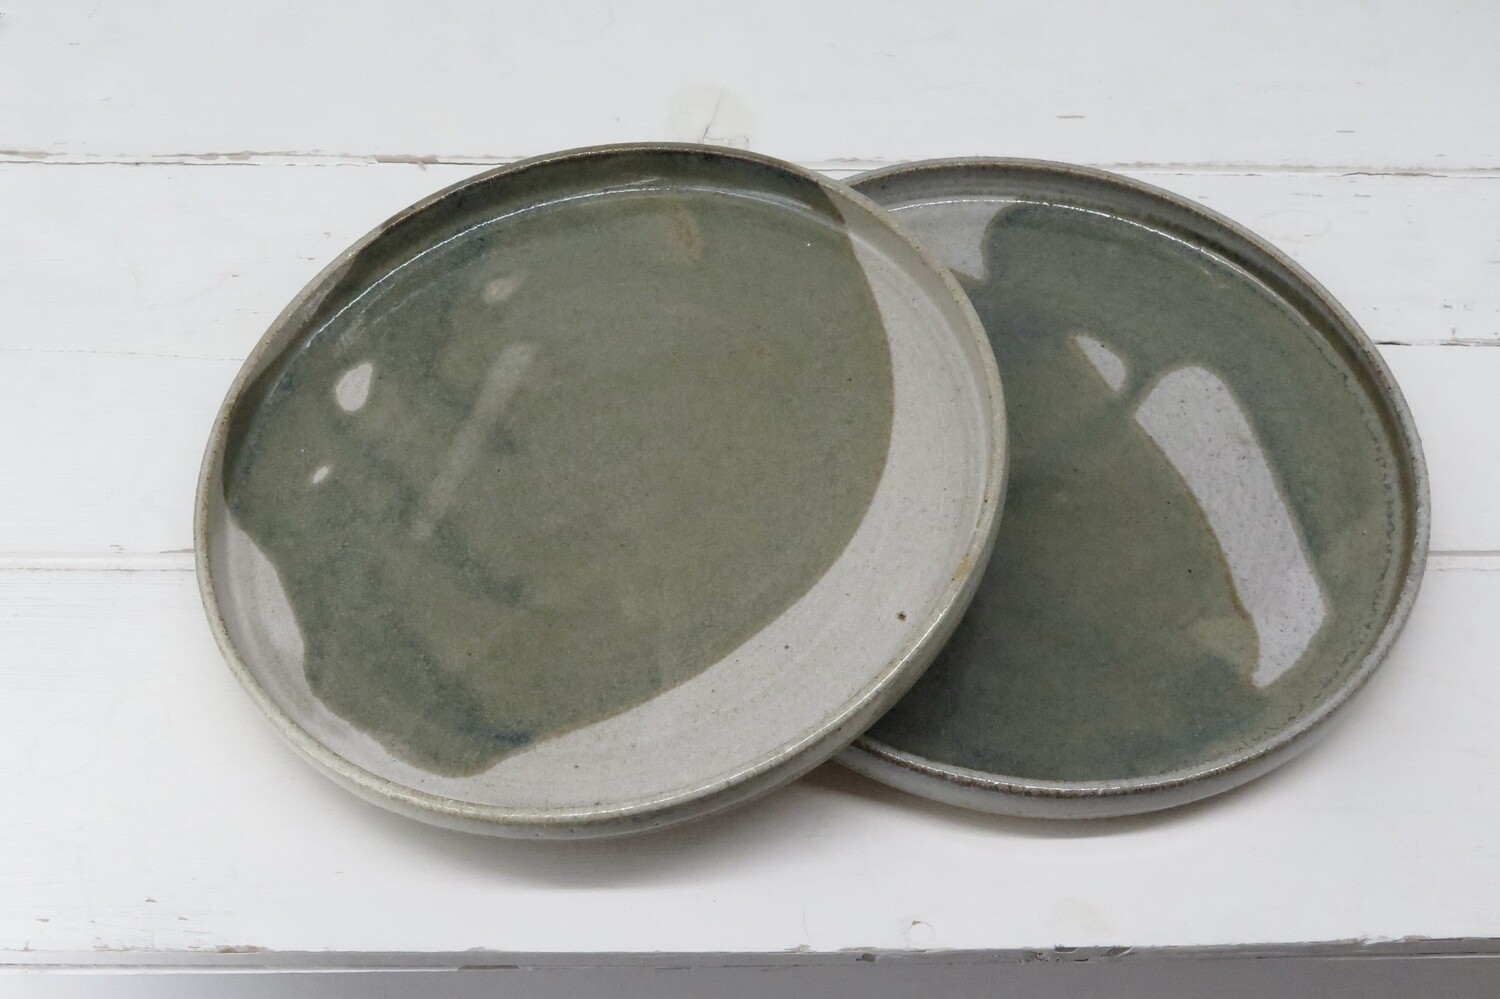 Salad plate - Flecked white and mottled green.